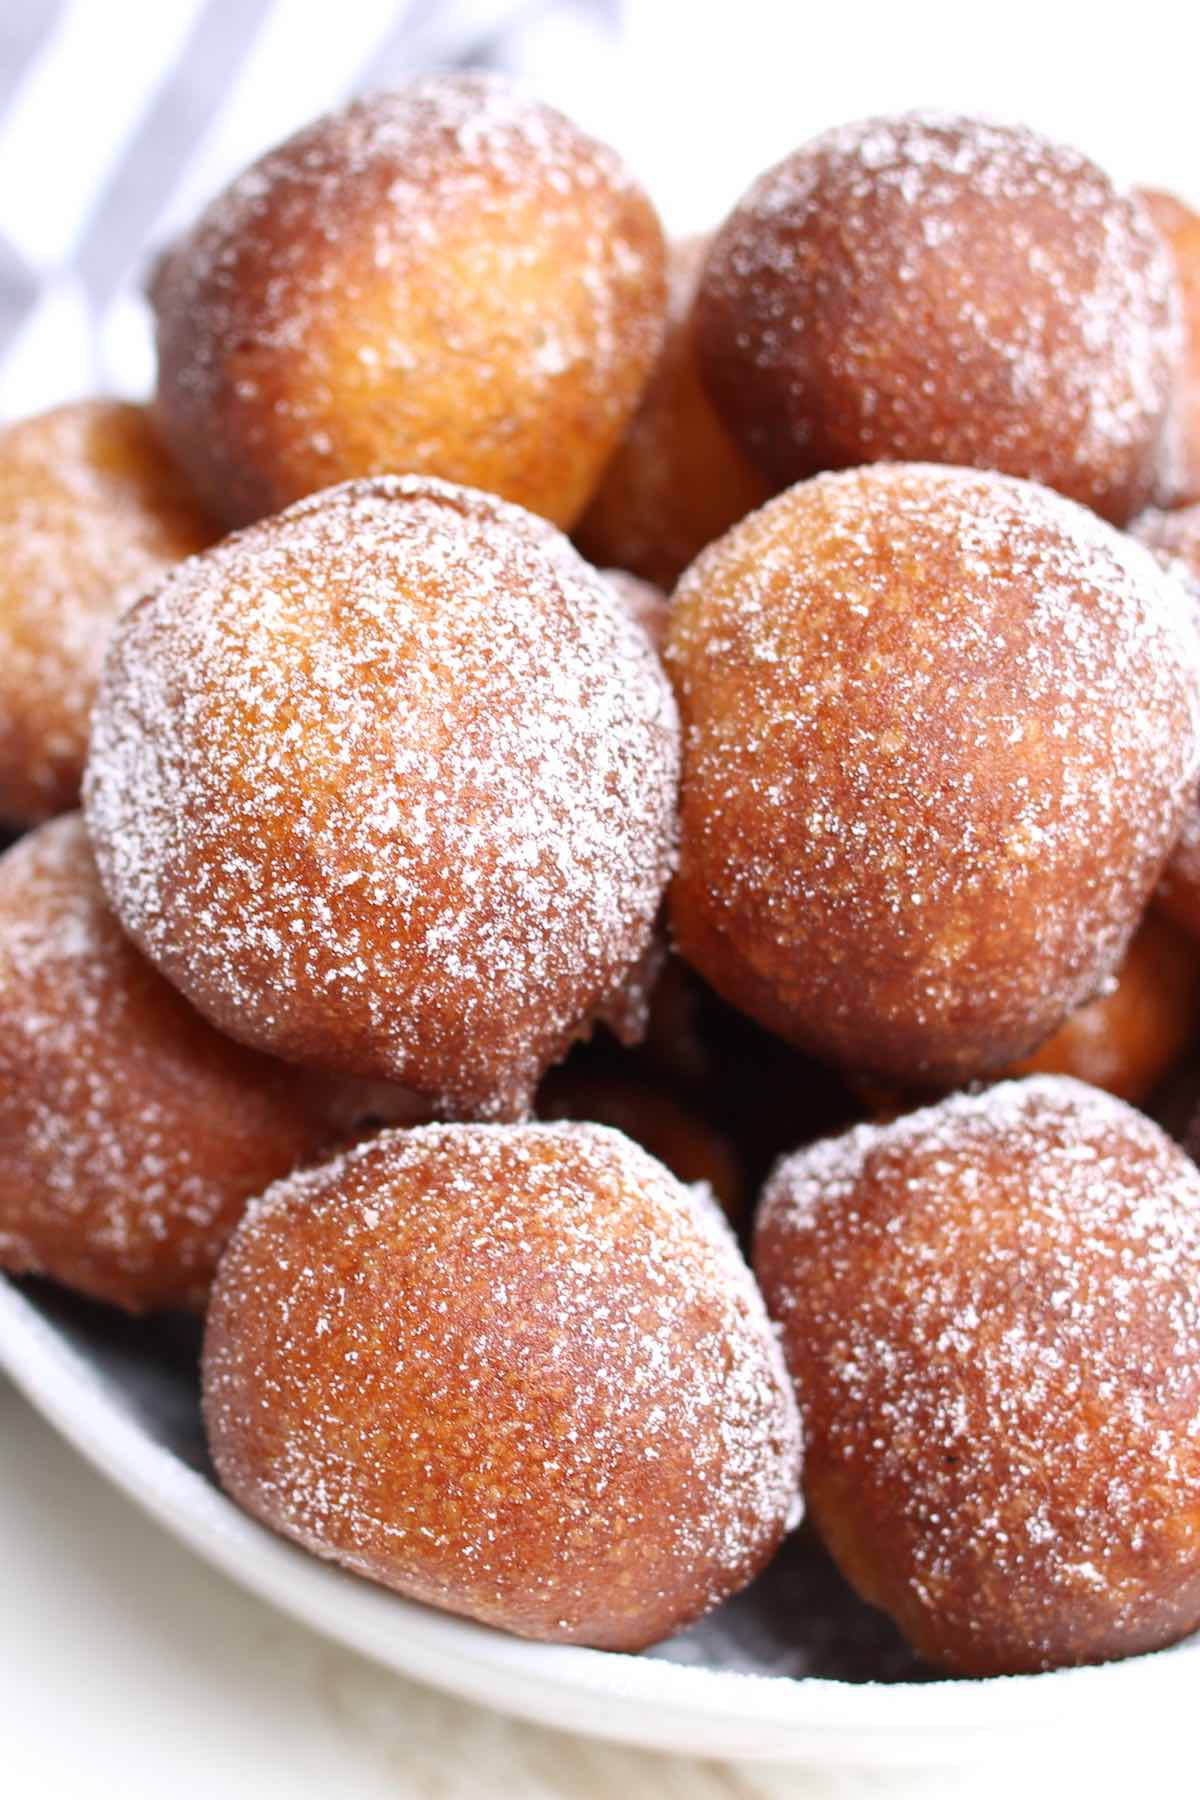 Grandma’s Zeppole Italian doughnuts are the easiest way to satisfy your donut cravings – light and fluffy on the inside and crispy on the onside. This zeppole recipe is so easy to make with a few simple ingredients. No finicky yeast required! #Zeppole #ItalianDoughnut